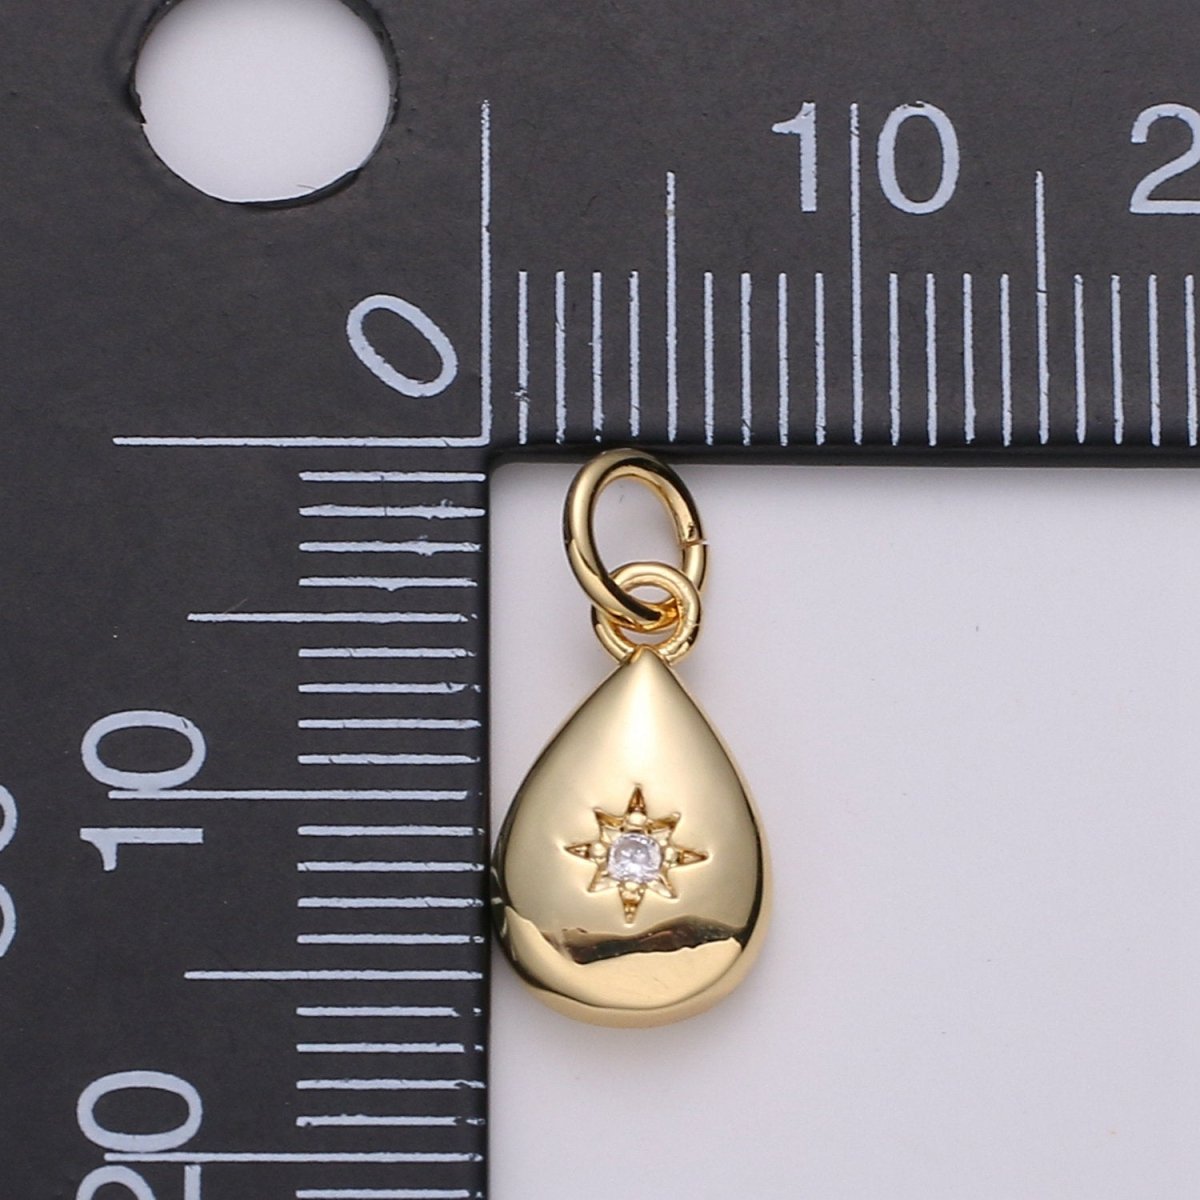 Dainty 14K Gold Filled North Star Charm Cubic Zirconia Tear Drop Pendant in Gold micro Pave CZ North Star Pendant Jewelry Making | D-429, D-430 - DLUXCA